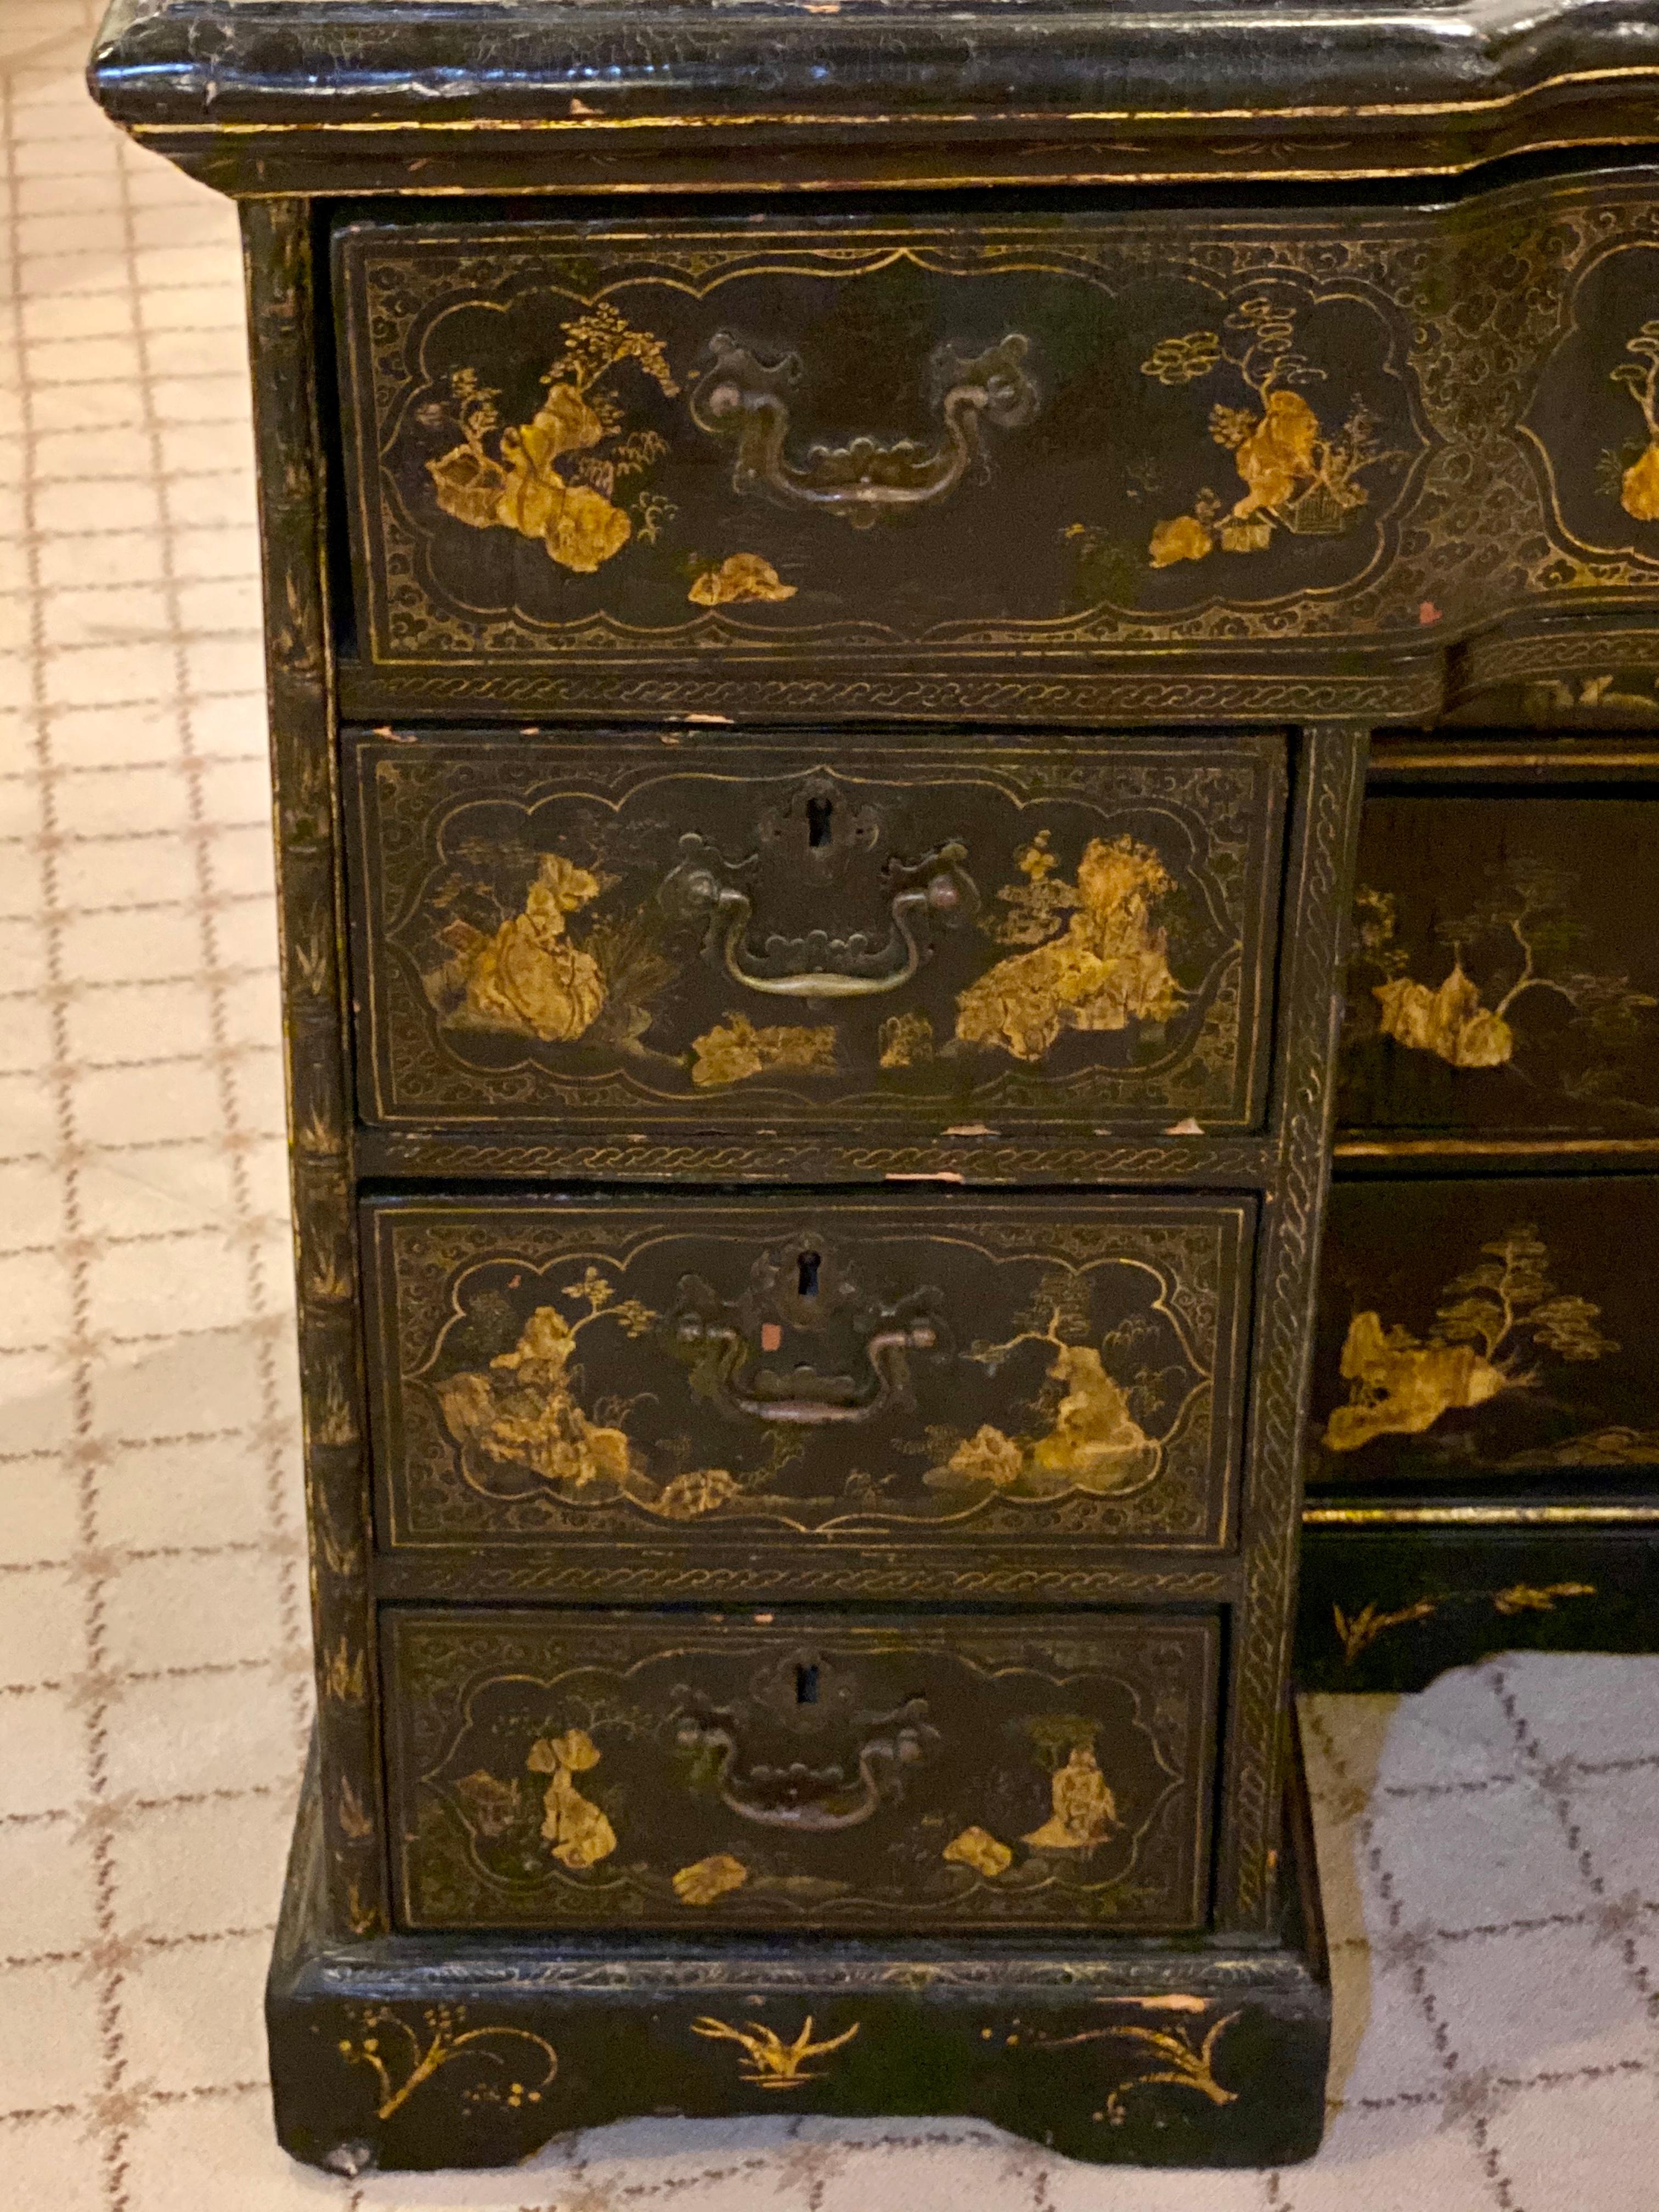 Wood 18th-19th Century Chinese Export Chinoiserie Lacquer Decorated Knee Hole Desk